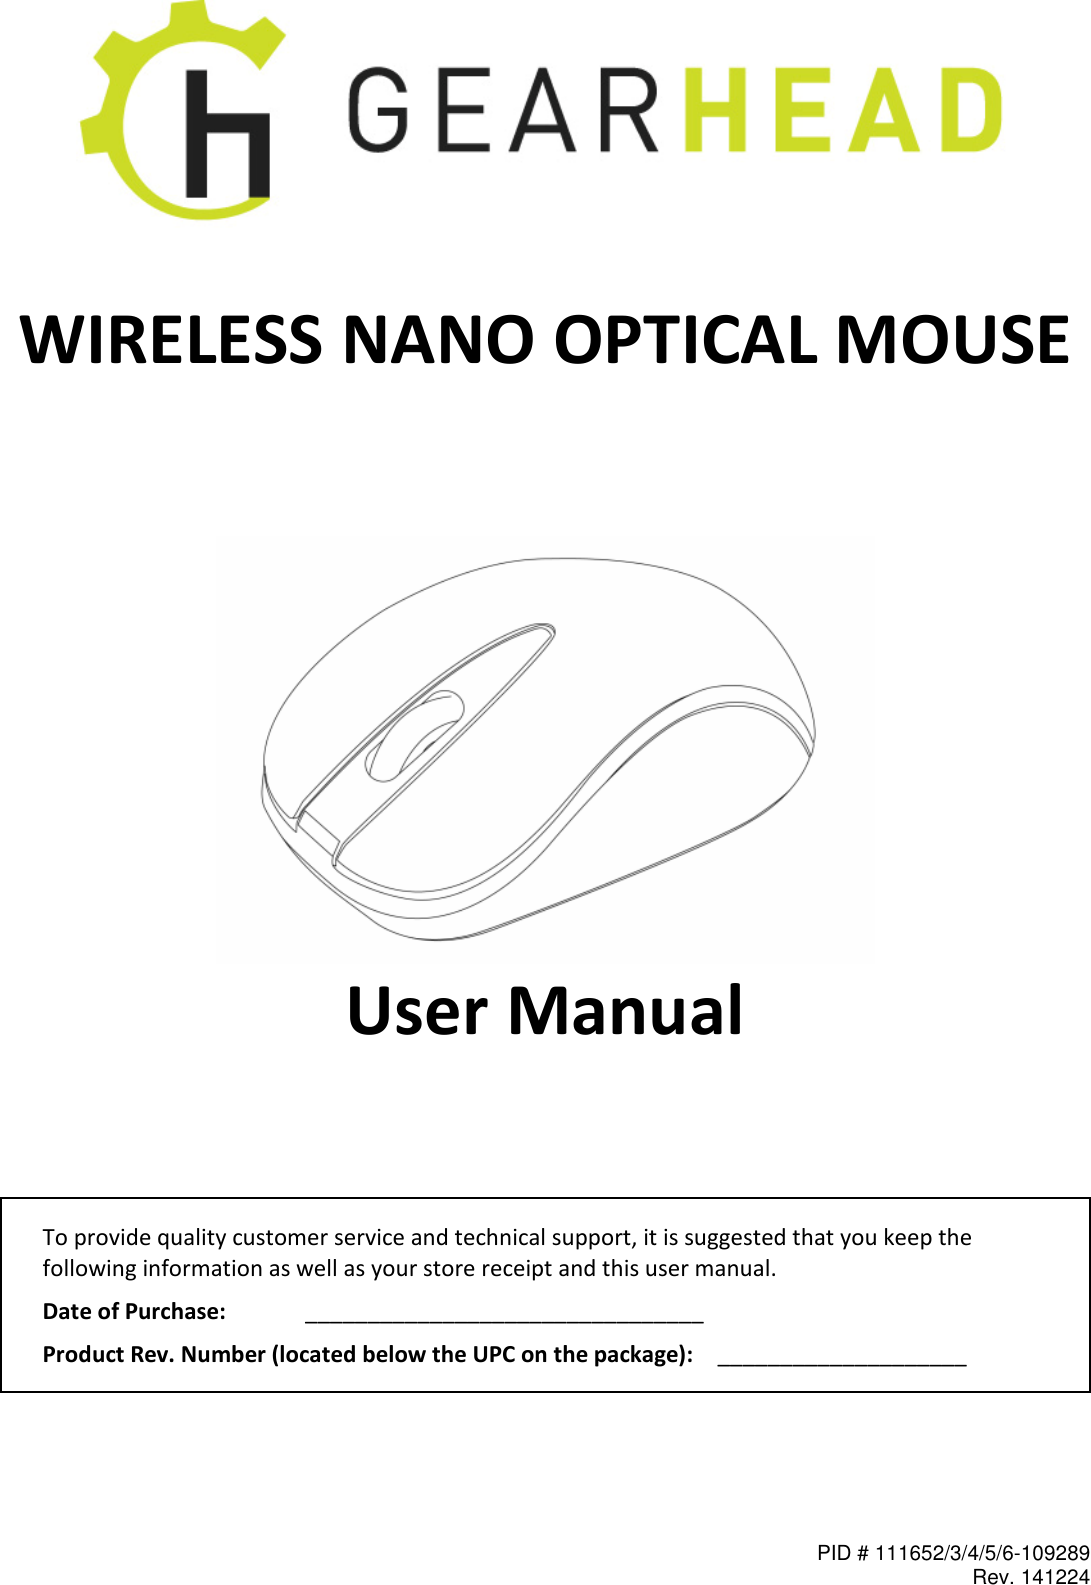 PID # 111652/3/4/5/6-109289 Rev. 141224    WIRELESS NANO OPTICAL MOUSE      User Manual   To provide quality customer service and technical support, it is suggested that you keep the following information as well as your store receipt and this user manual. Date of Purchase:   ________________________________ Product Rev. Number (located below the UPC on the package):   ____________________  